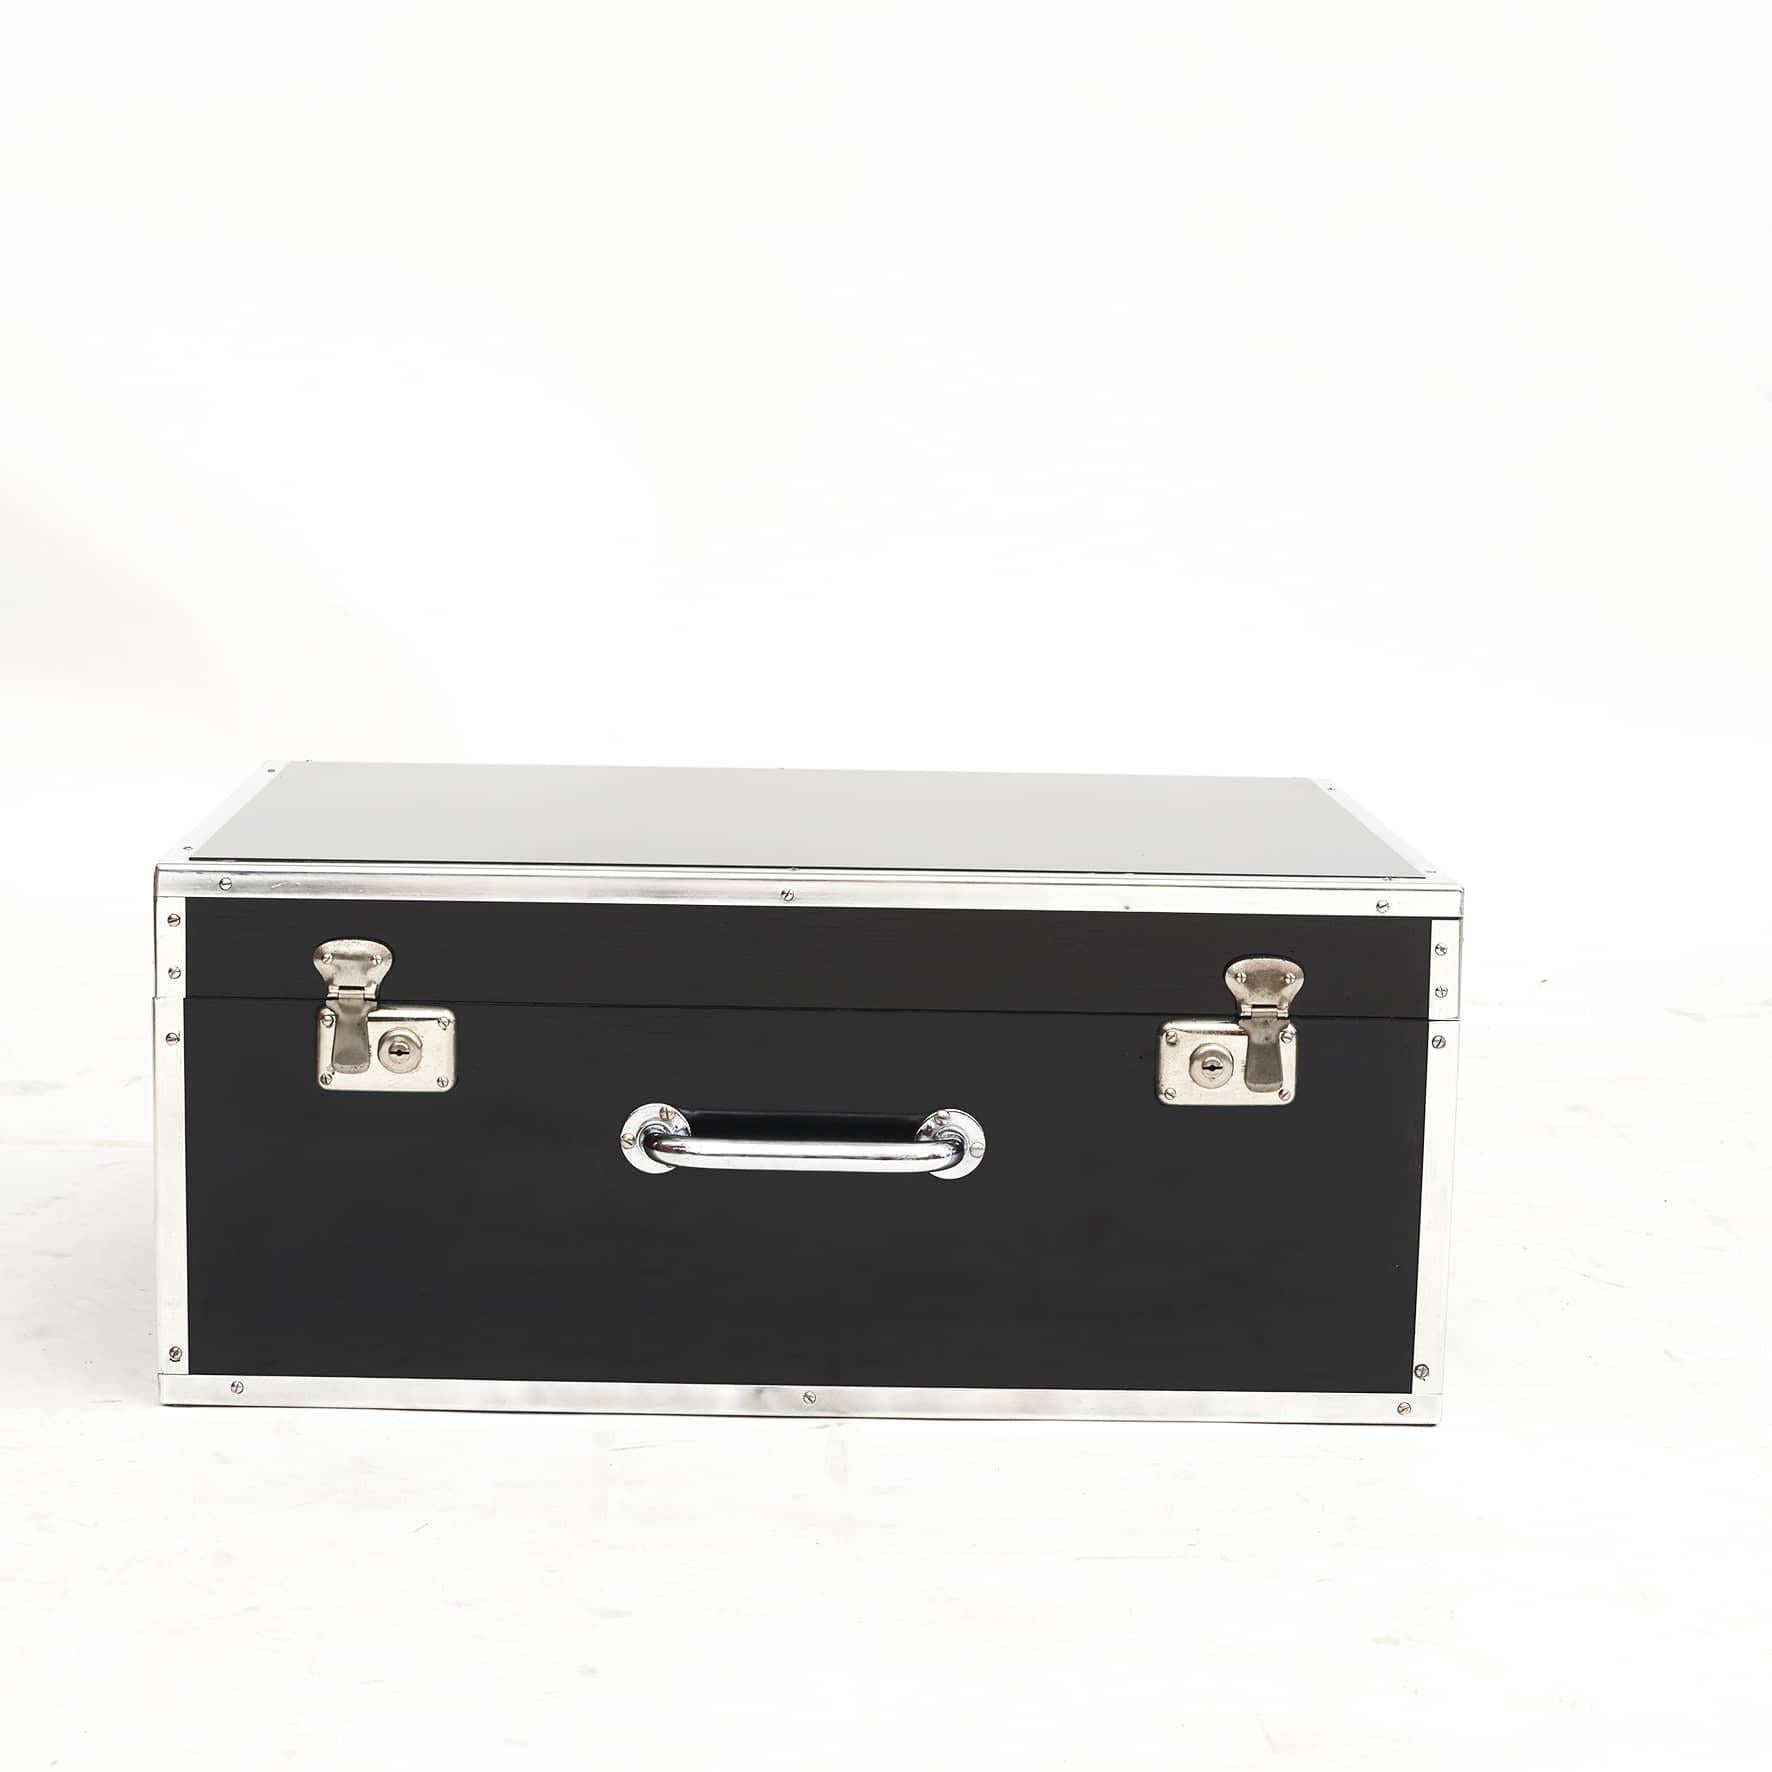 Black Transport box in polished wood.
With chrome-plated protective strips on edges.
Presumably used for instrument transport.
Suitable for coffee table or side table etc.
Sweden approx. 1960.
Measurement (cm) H: 32 W: 75 D: 53 (Incl. handle: